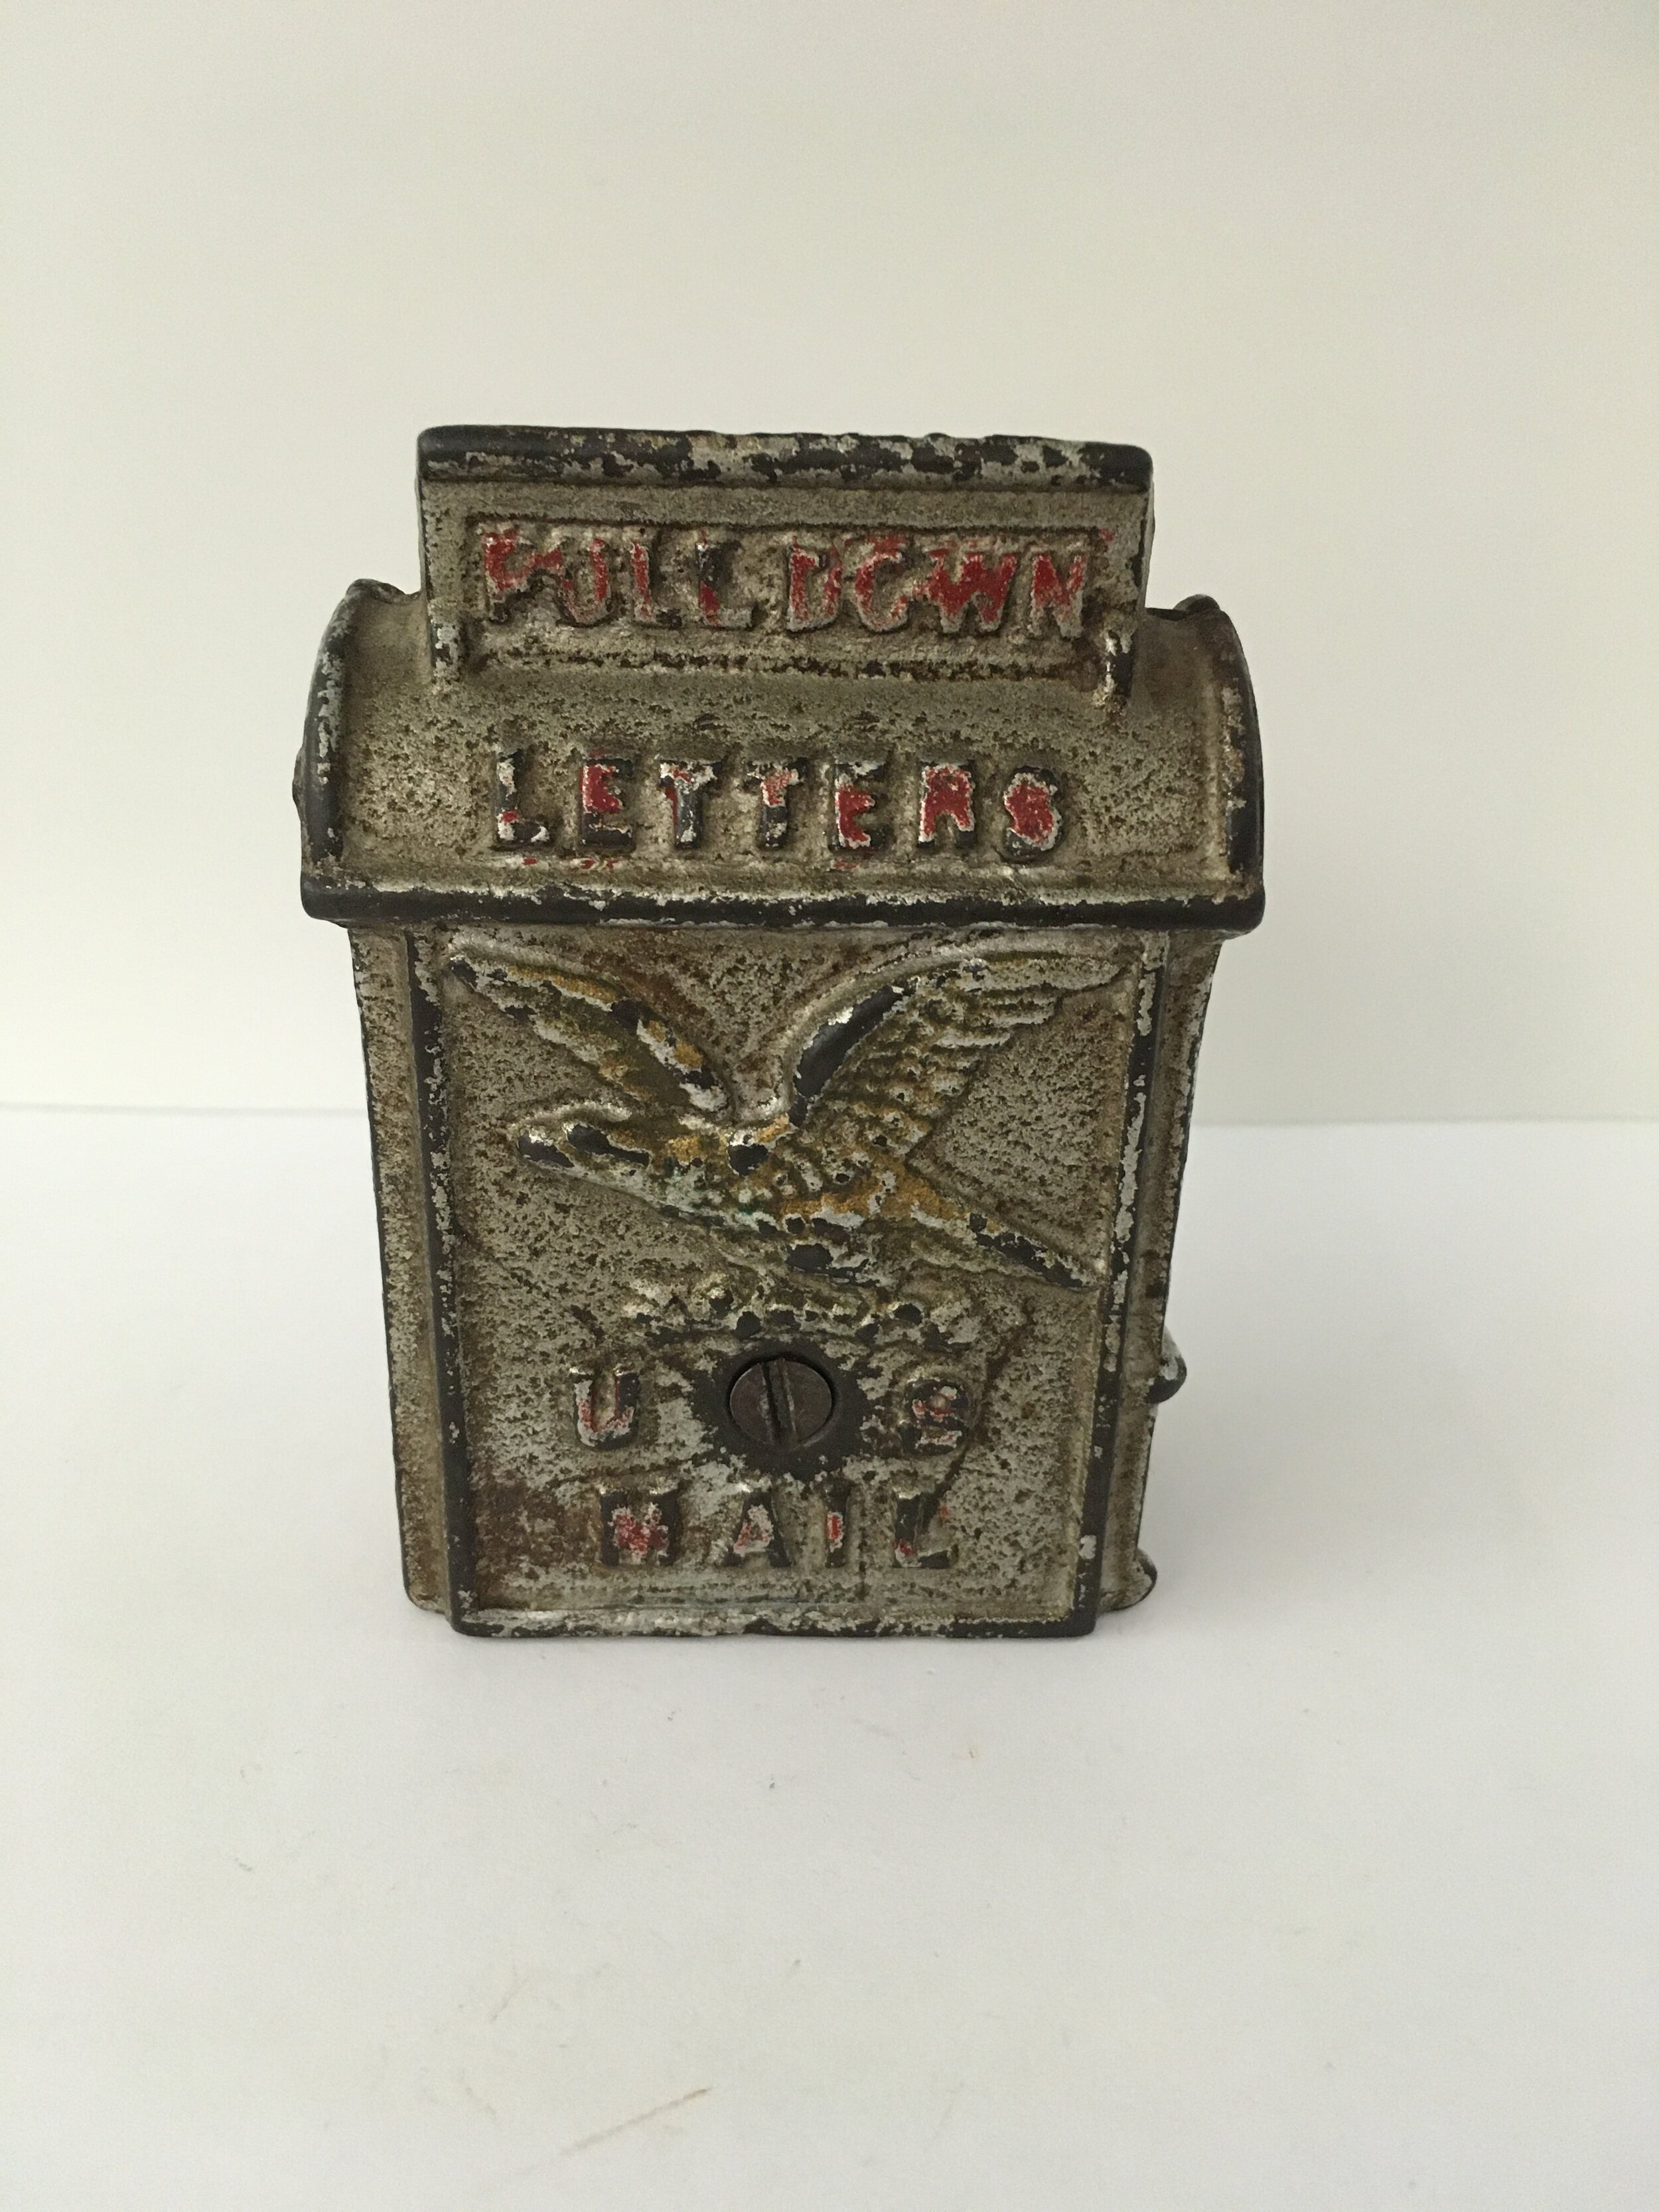 1880 Kenton U.S. Mail Pull Down Letters Eagle Mailbox Still Coin Bank